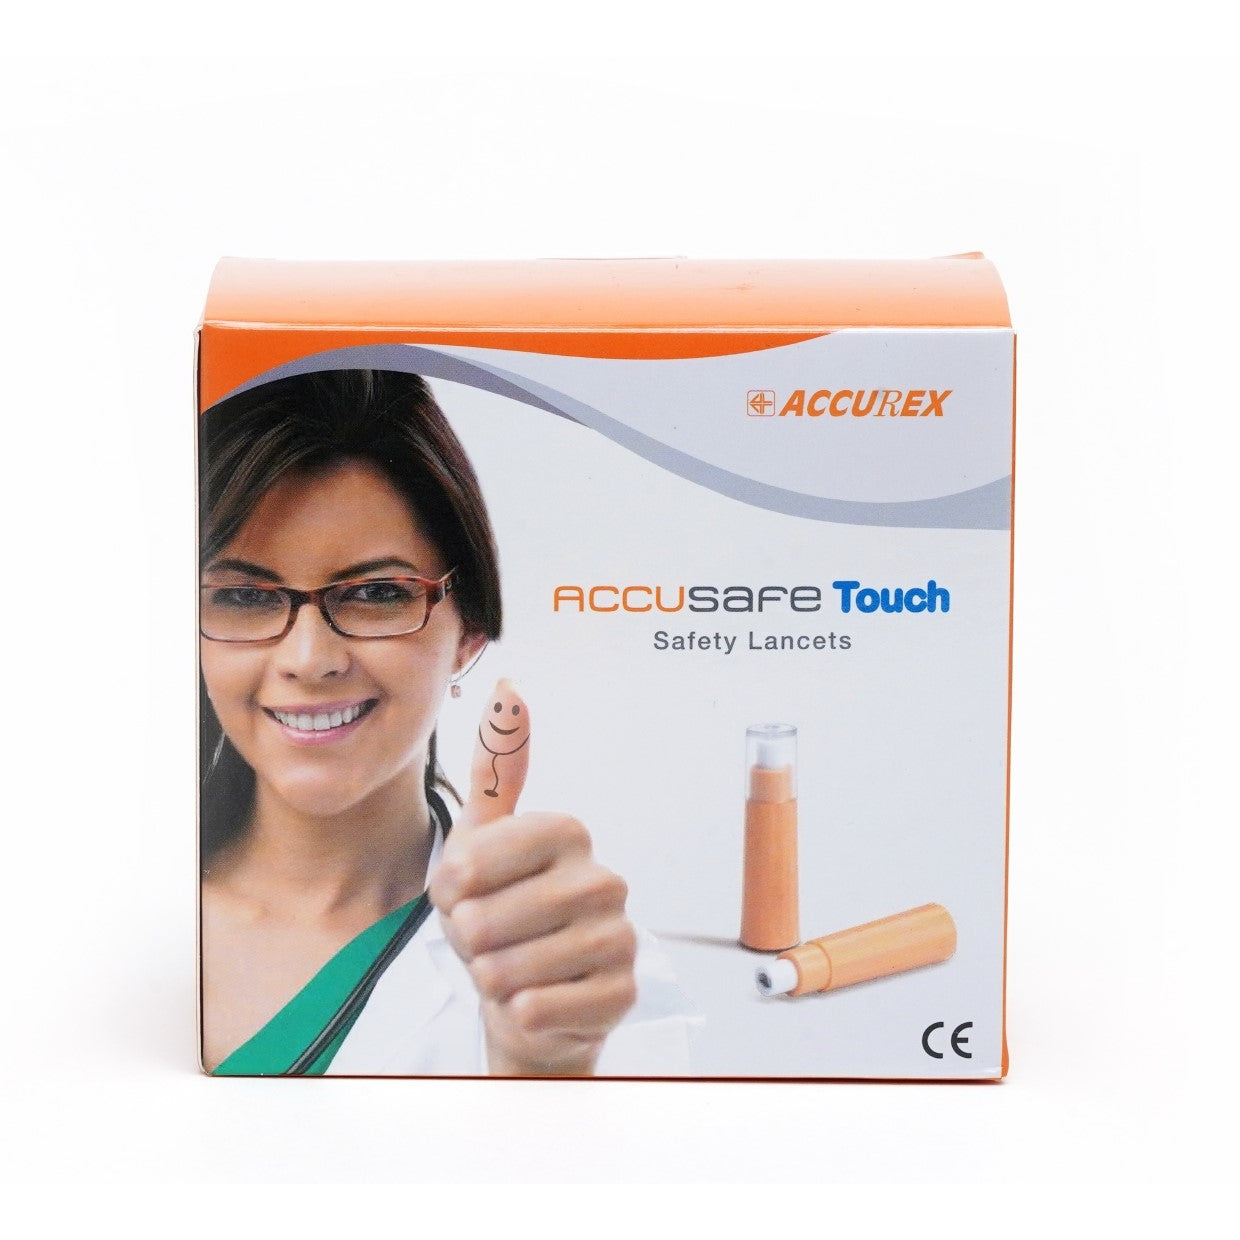 Accurex Accusafe touch lancets (100 units)